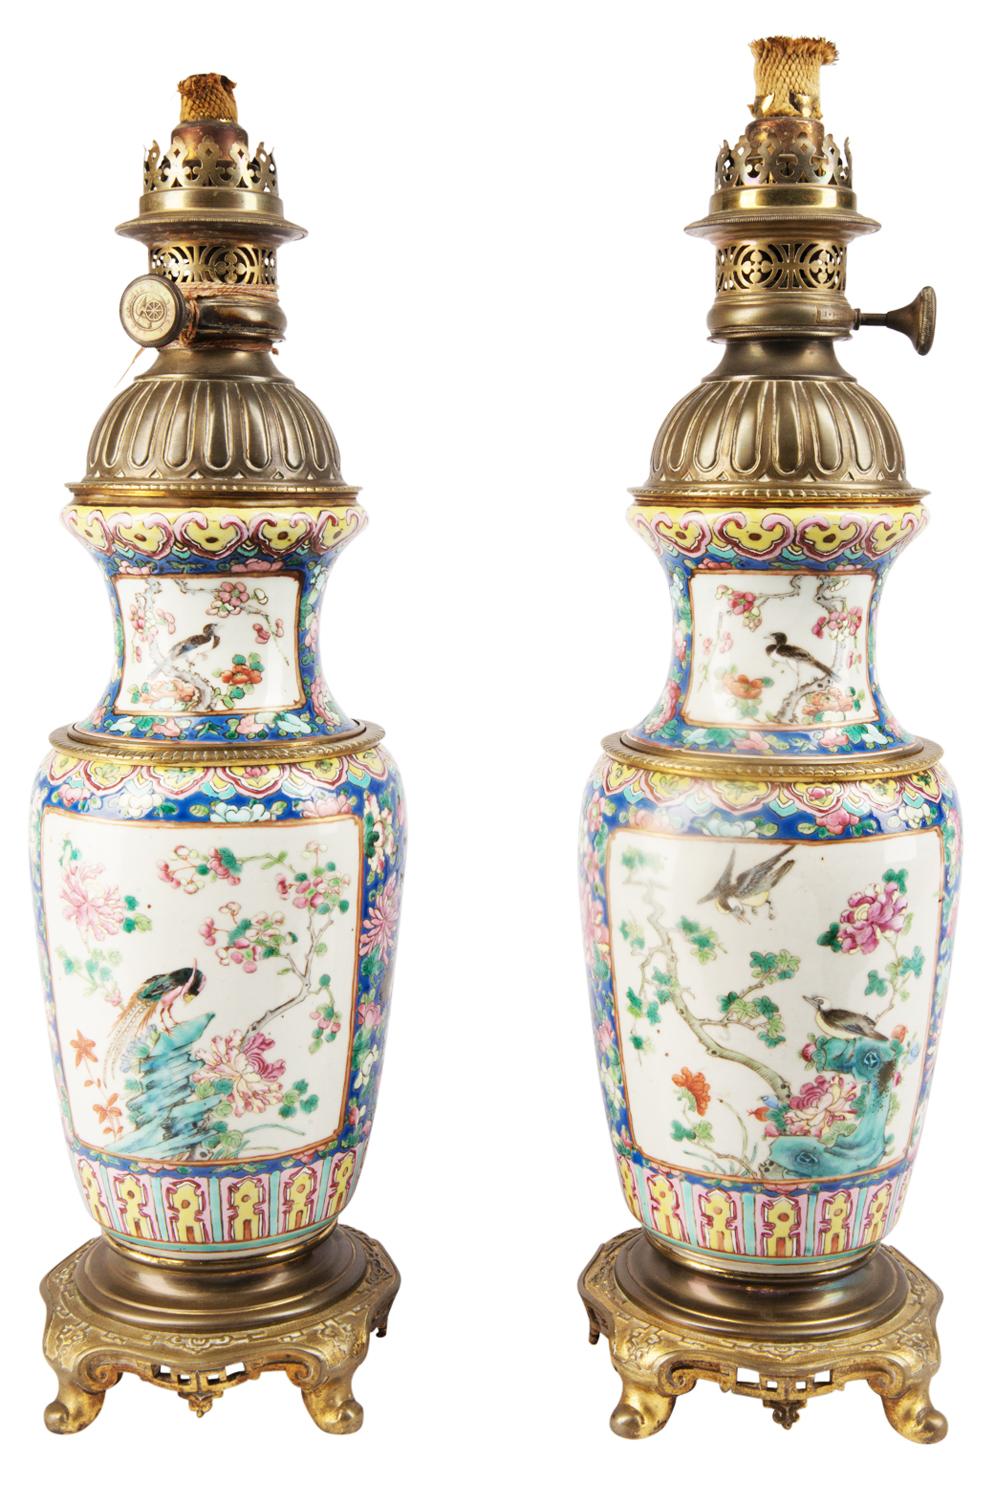 A good quality pair of Chinese 19th century Famille rose vases / lamps. Each with a blue and yellow ground, panels depicting exotic birds and flowers. Gilded ormolu lids and bases in the form of oriental hardwood stands.